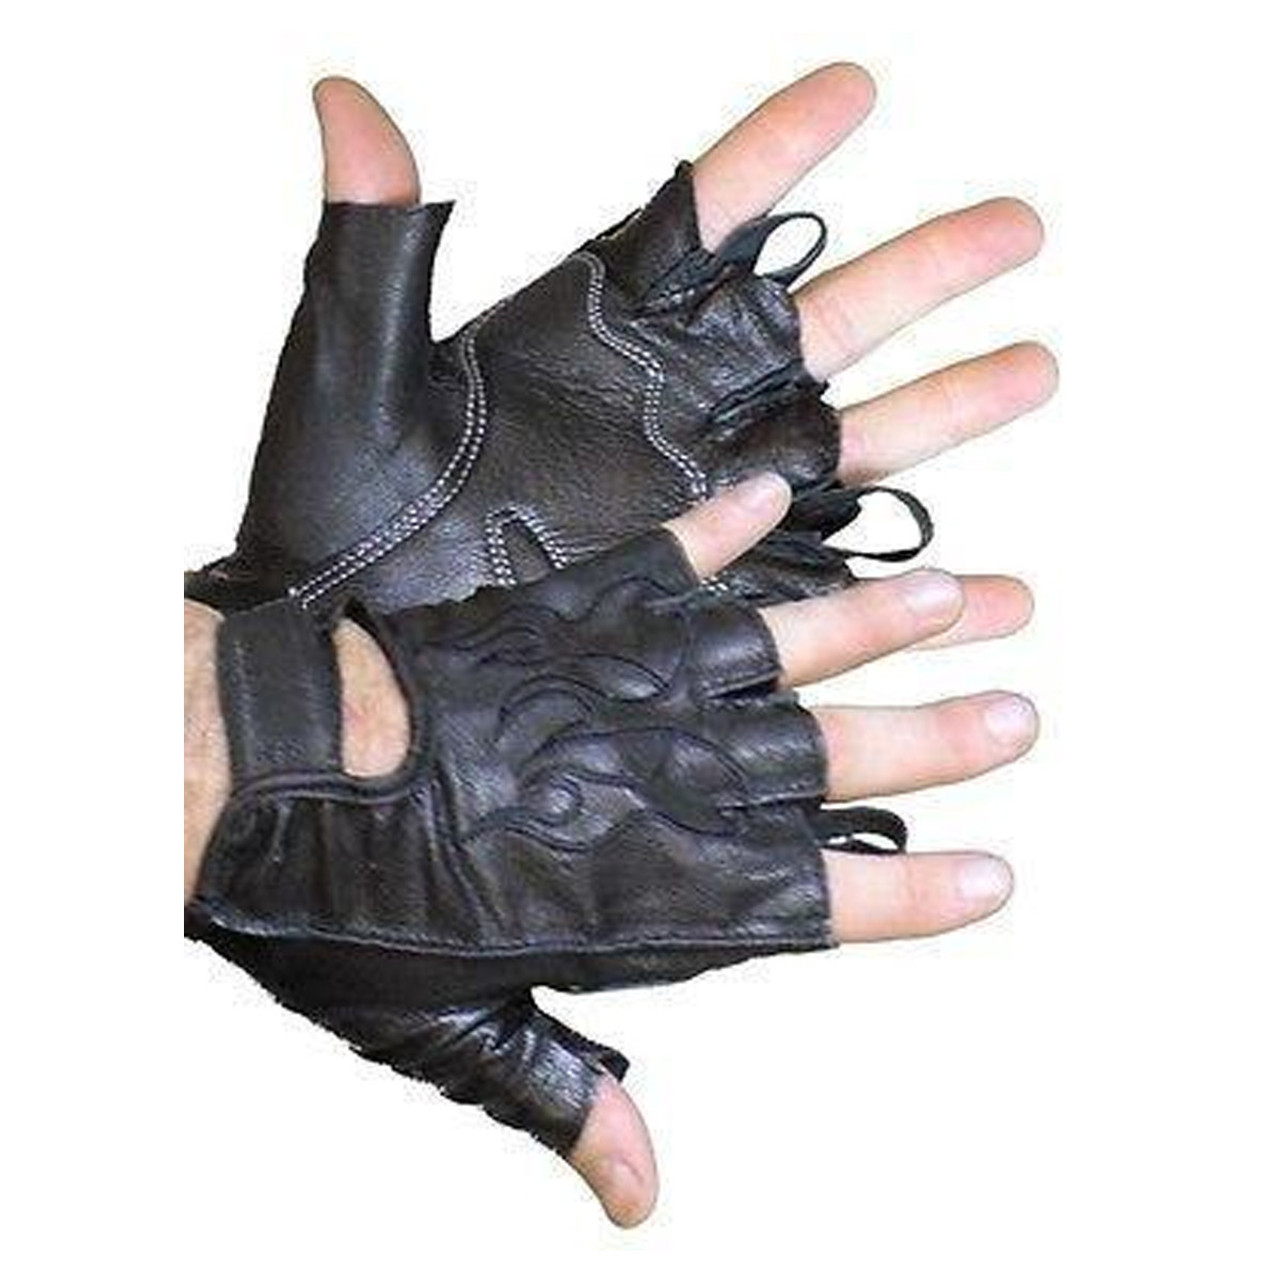 Fingerless Leather Work Gloves with Gel Pads